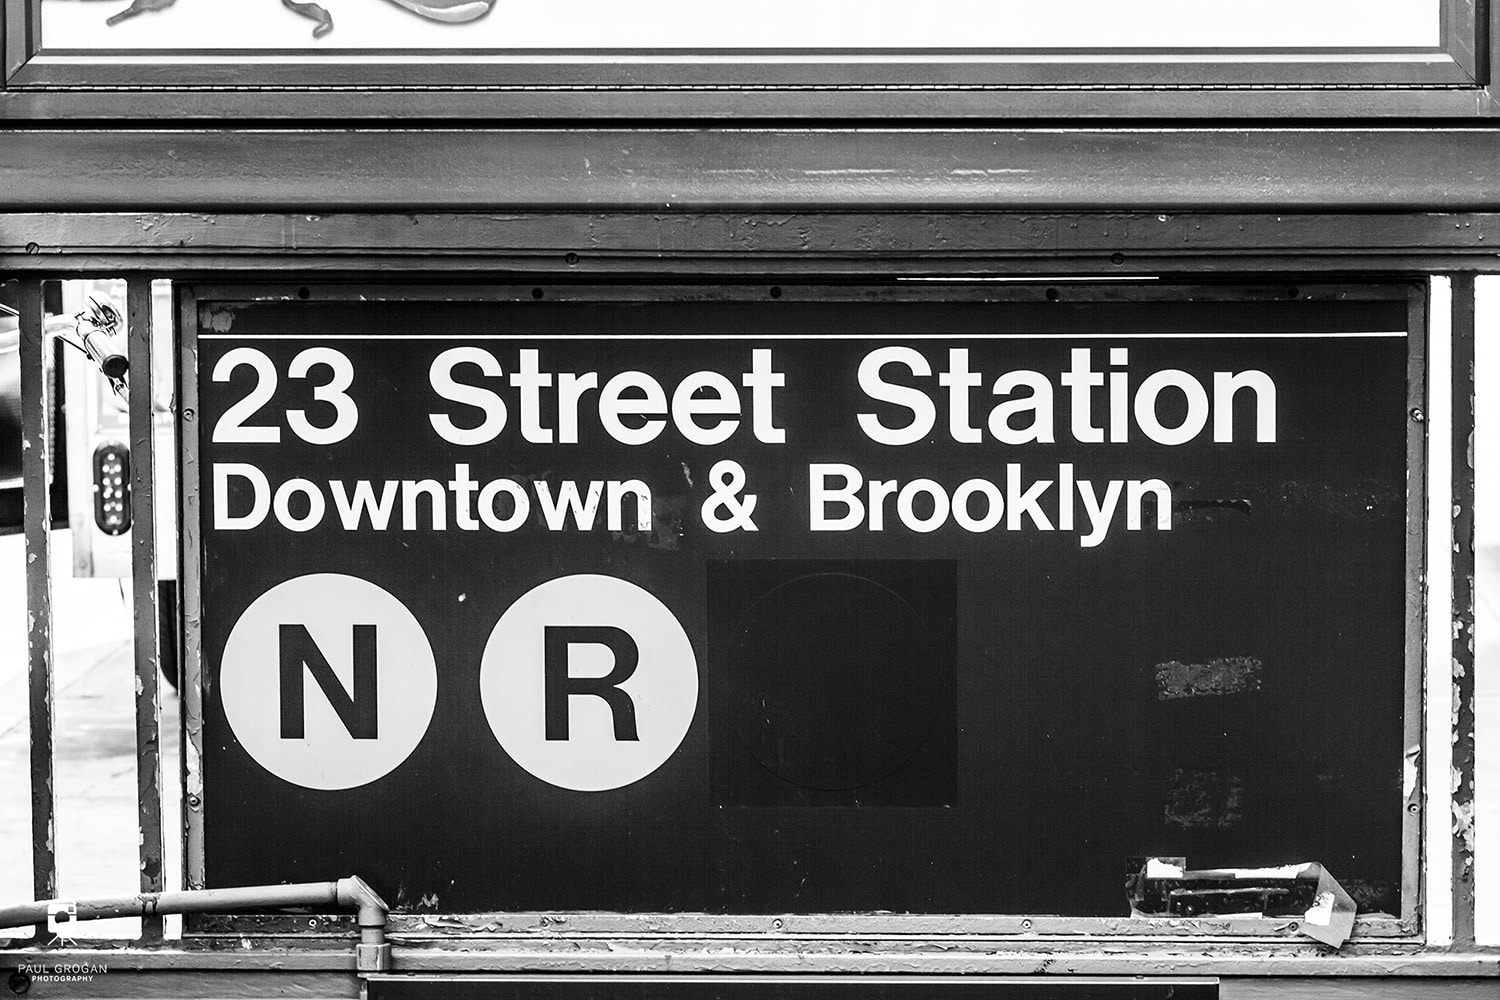 Downtown and Brooklyn, Subway New York Landscapes Architecture 2